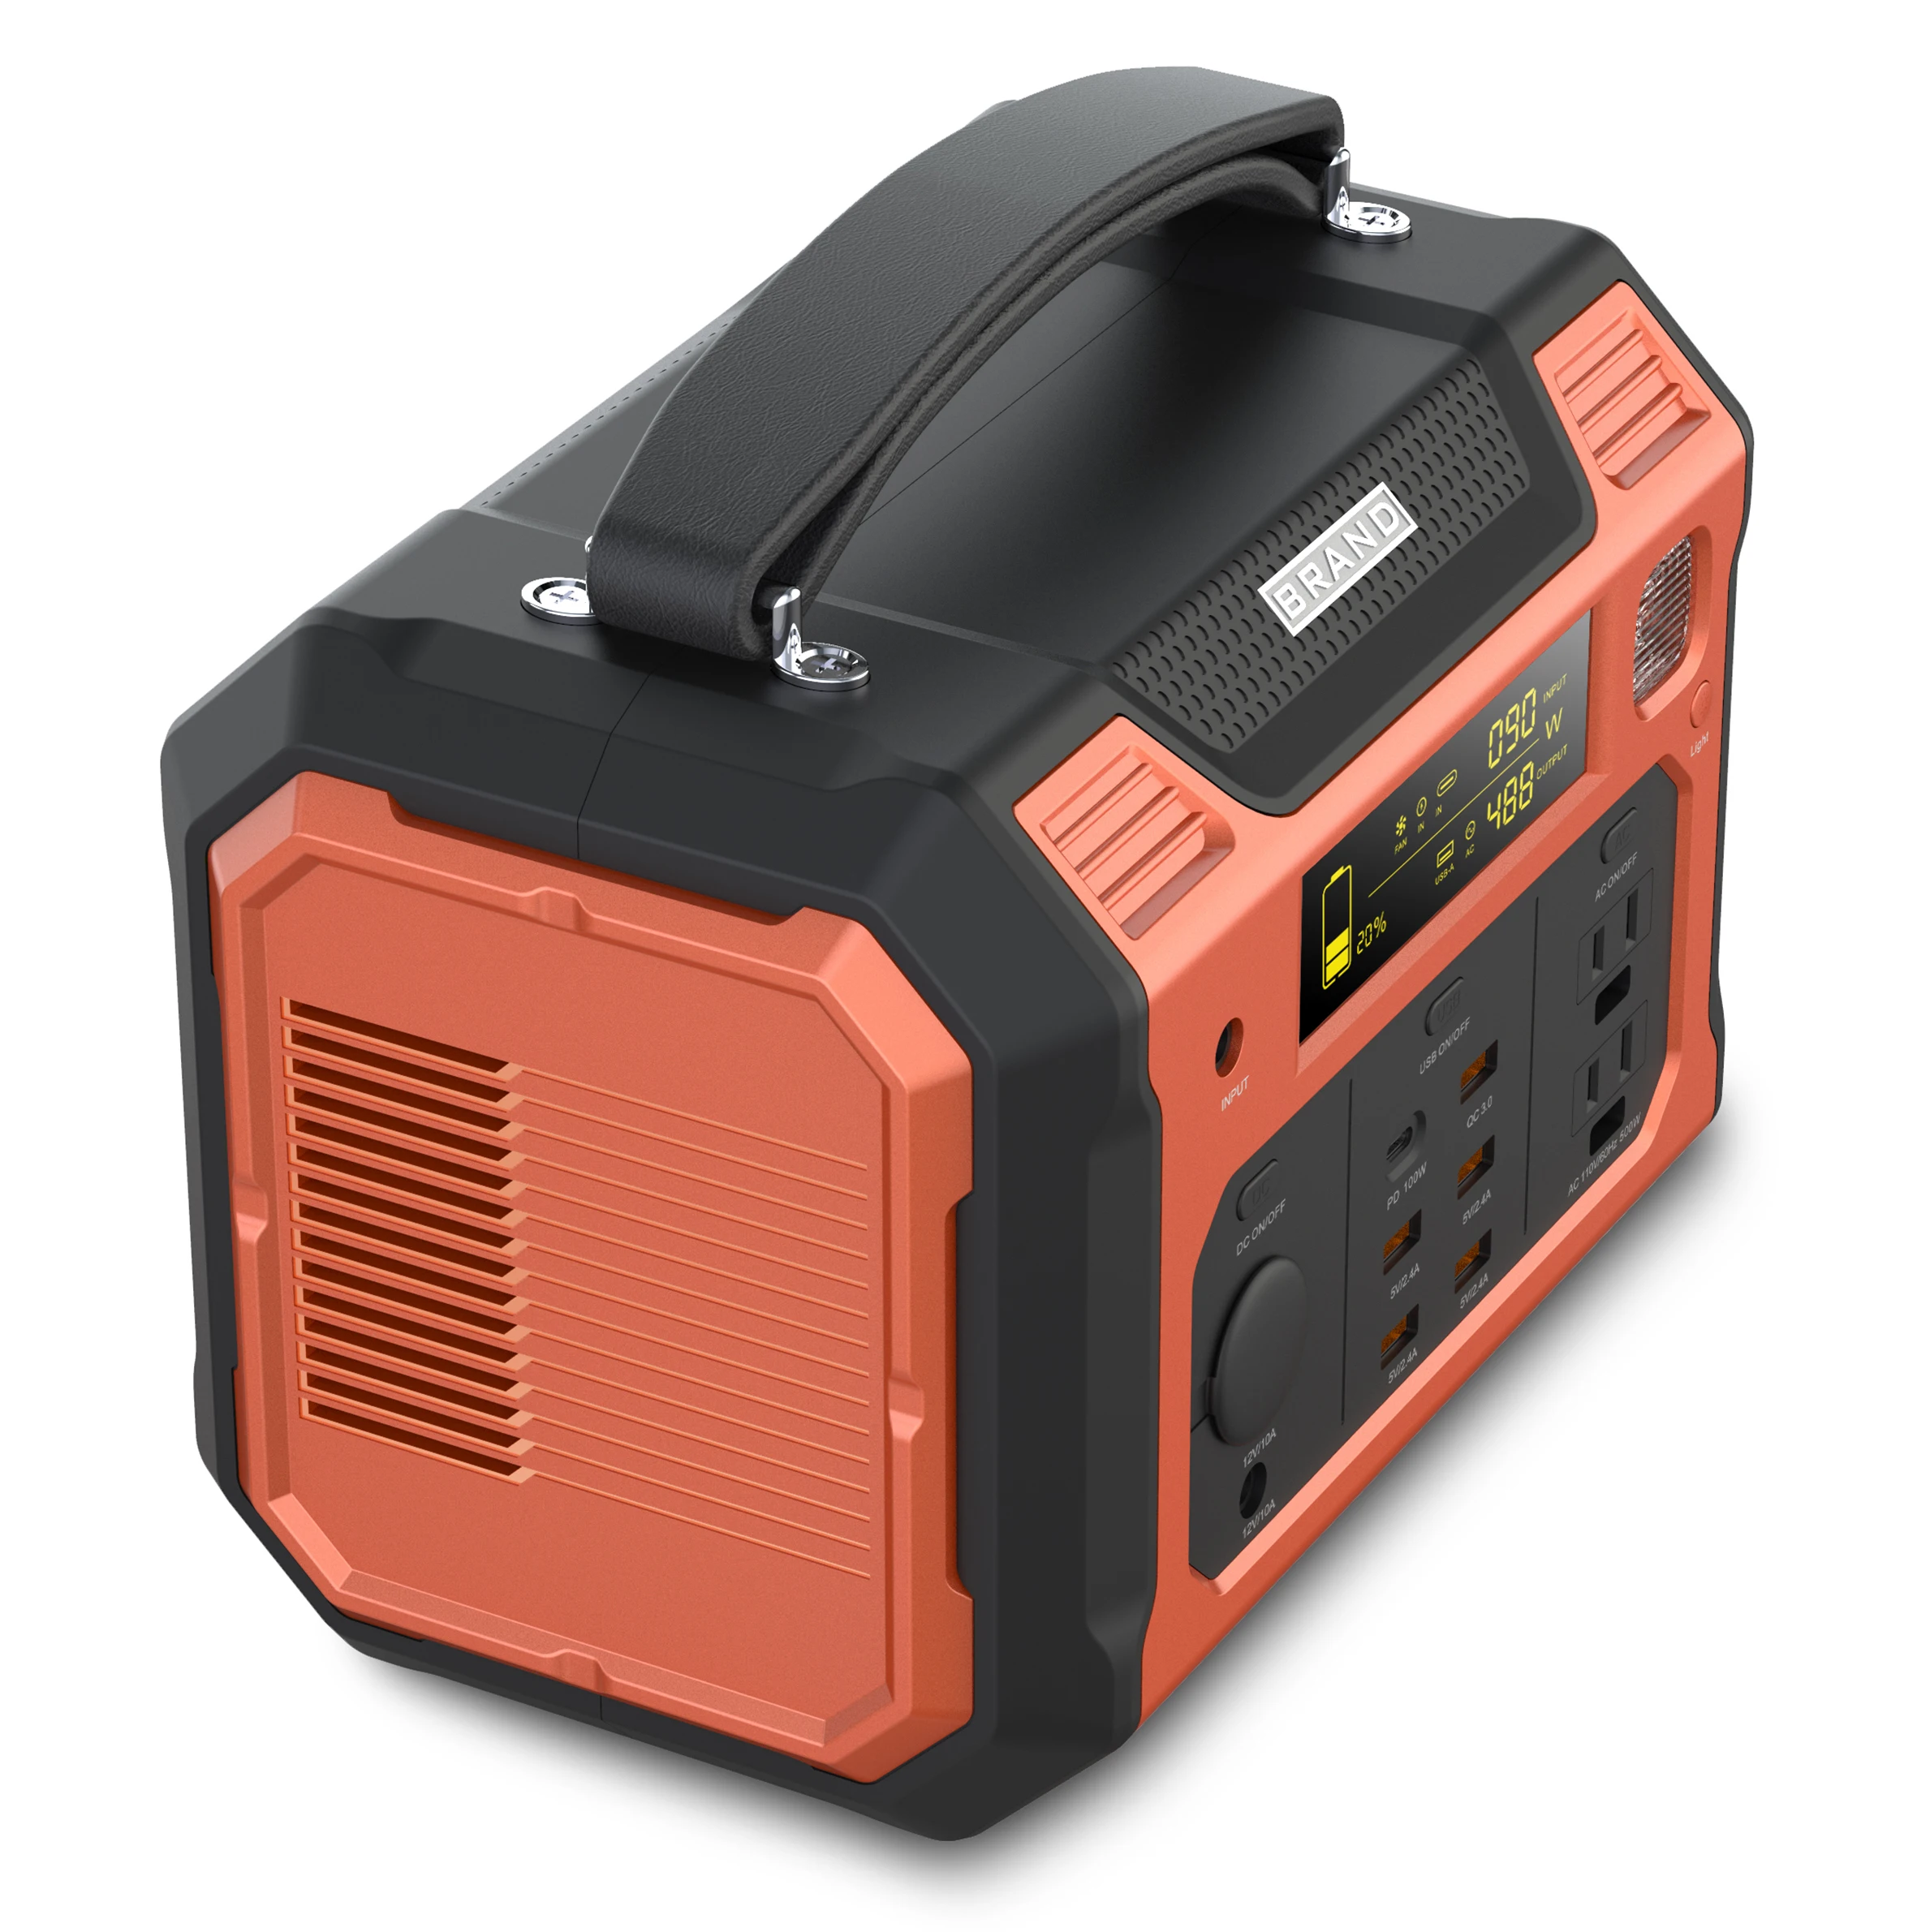 Portable Mobile power banks & power station 500W jackery portable power stations for homeuse and outdoor